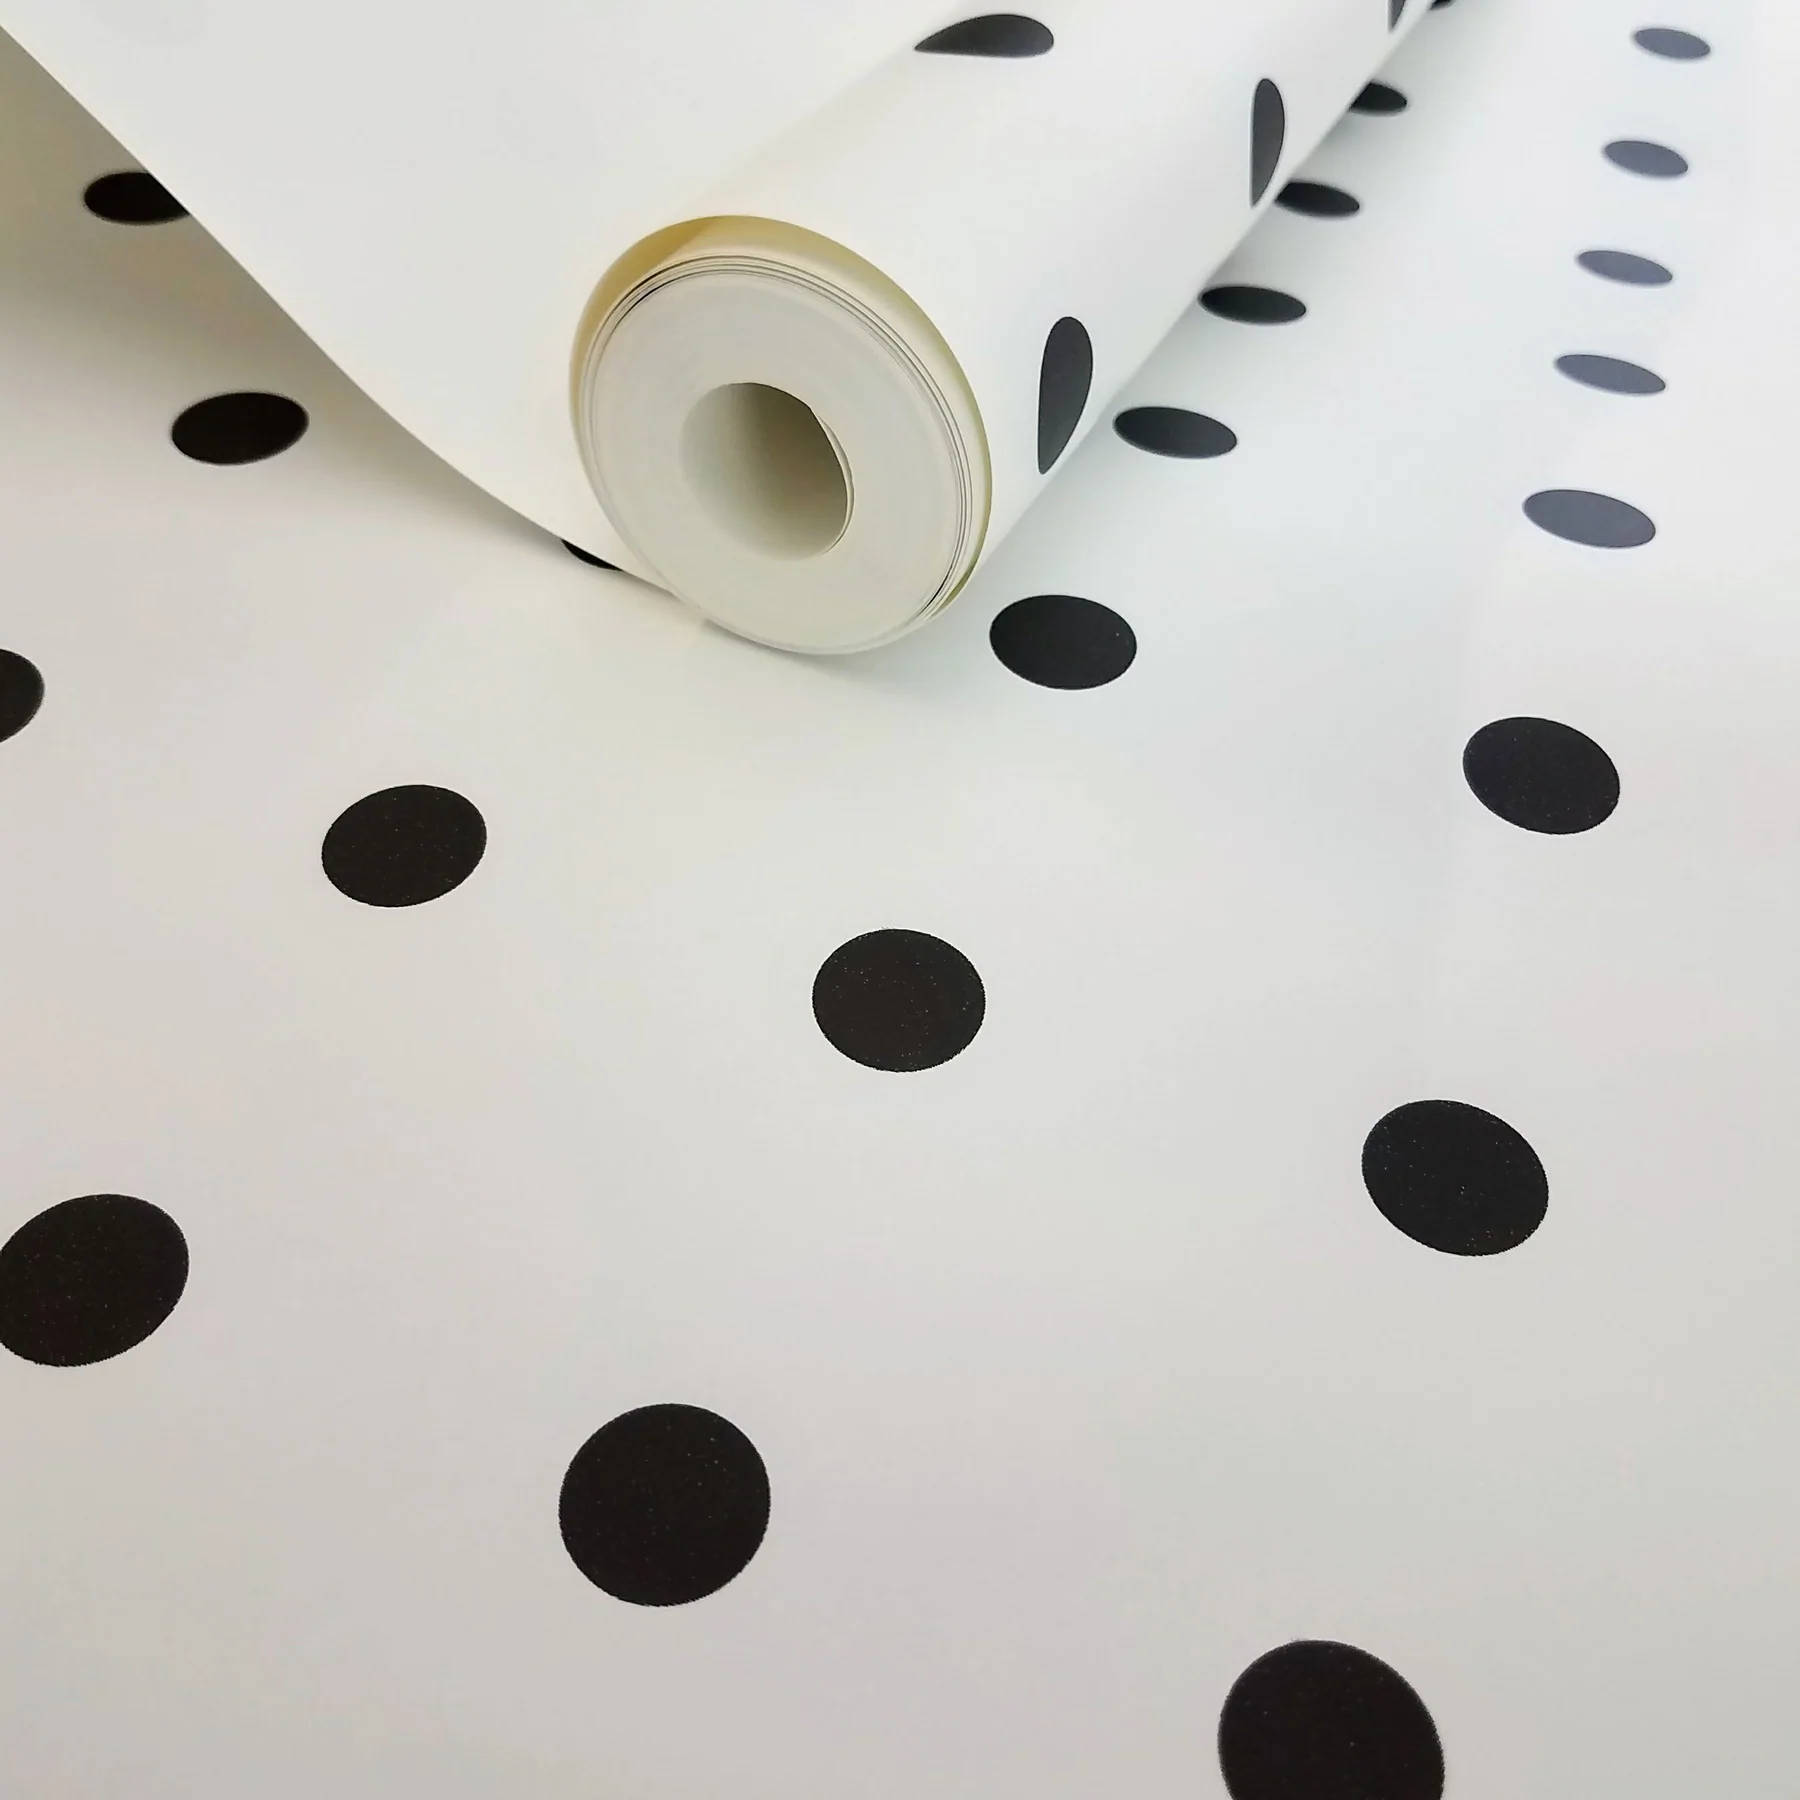 Wrapping Paper Black Dot Iphone Wallpaper